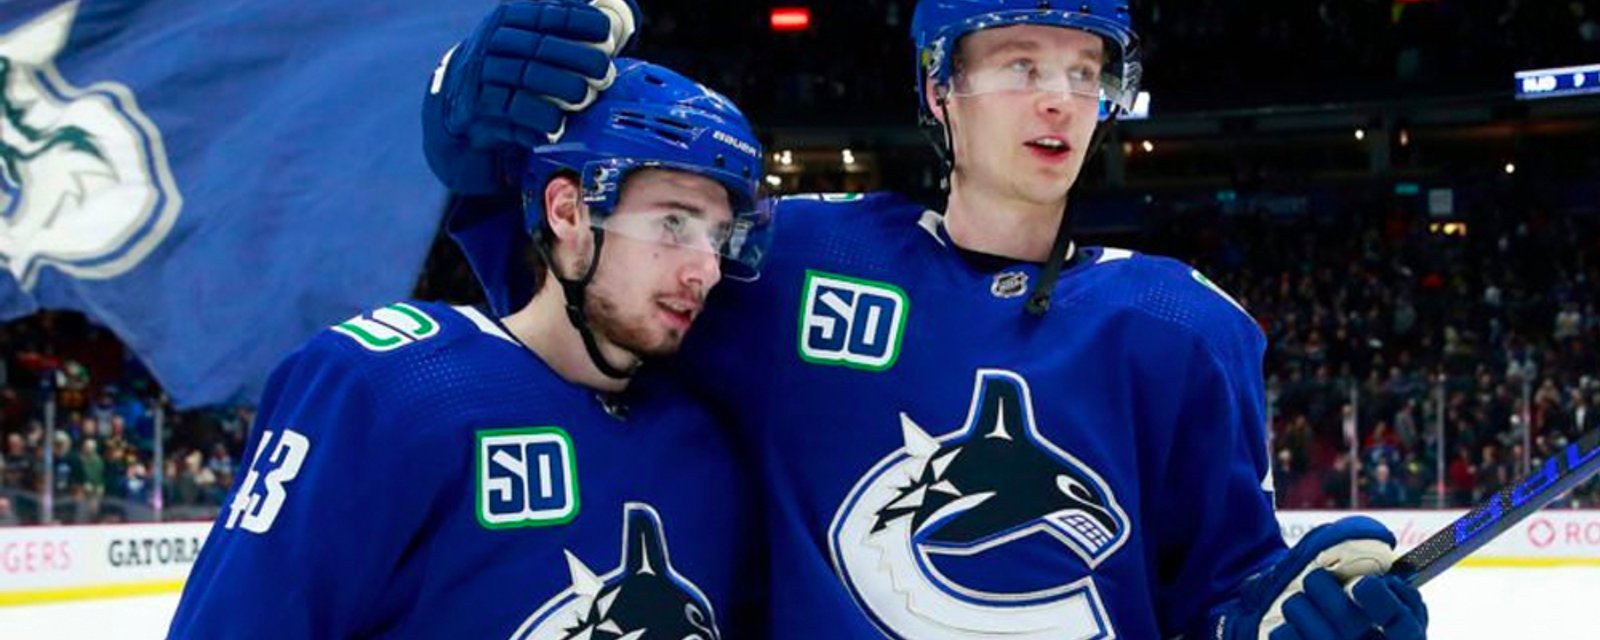 JP Barry, agent for Pettersson and Hughes, talks about contract negotiations and things do NOT look good for the Canucks